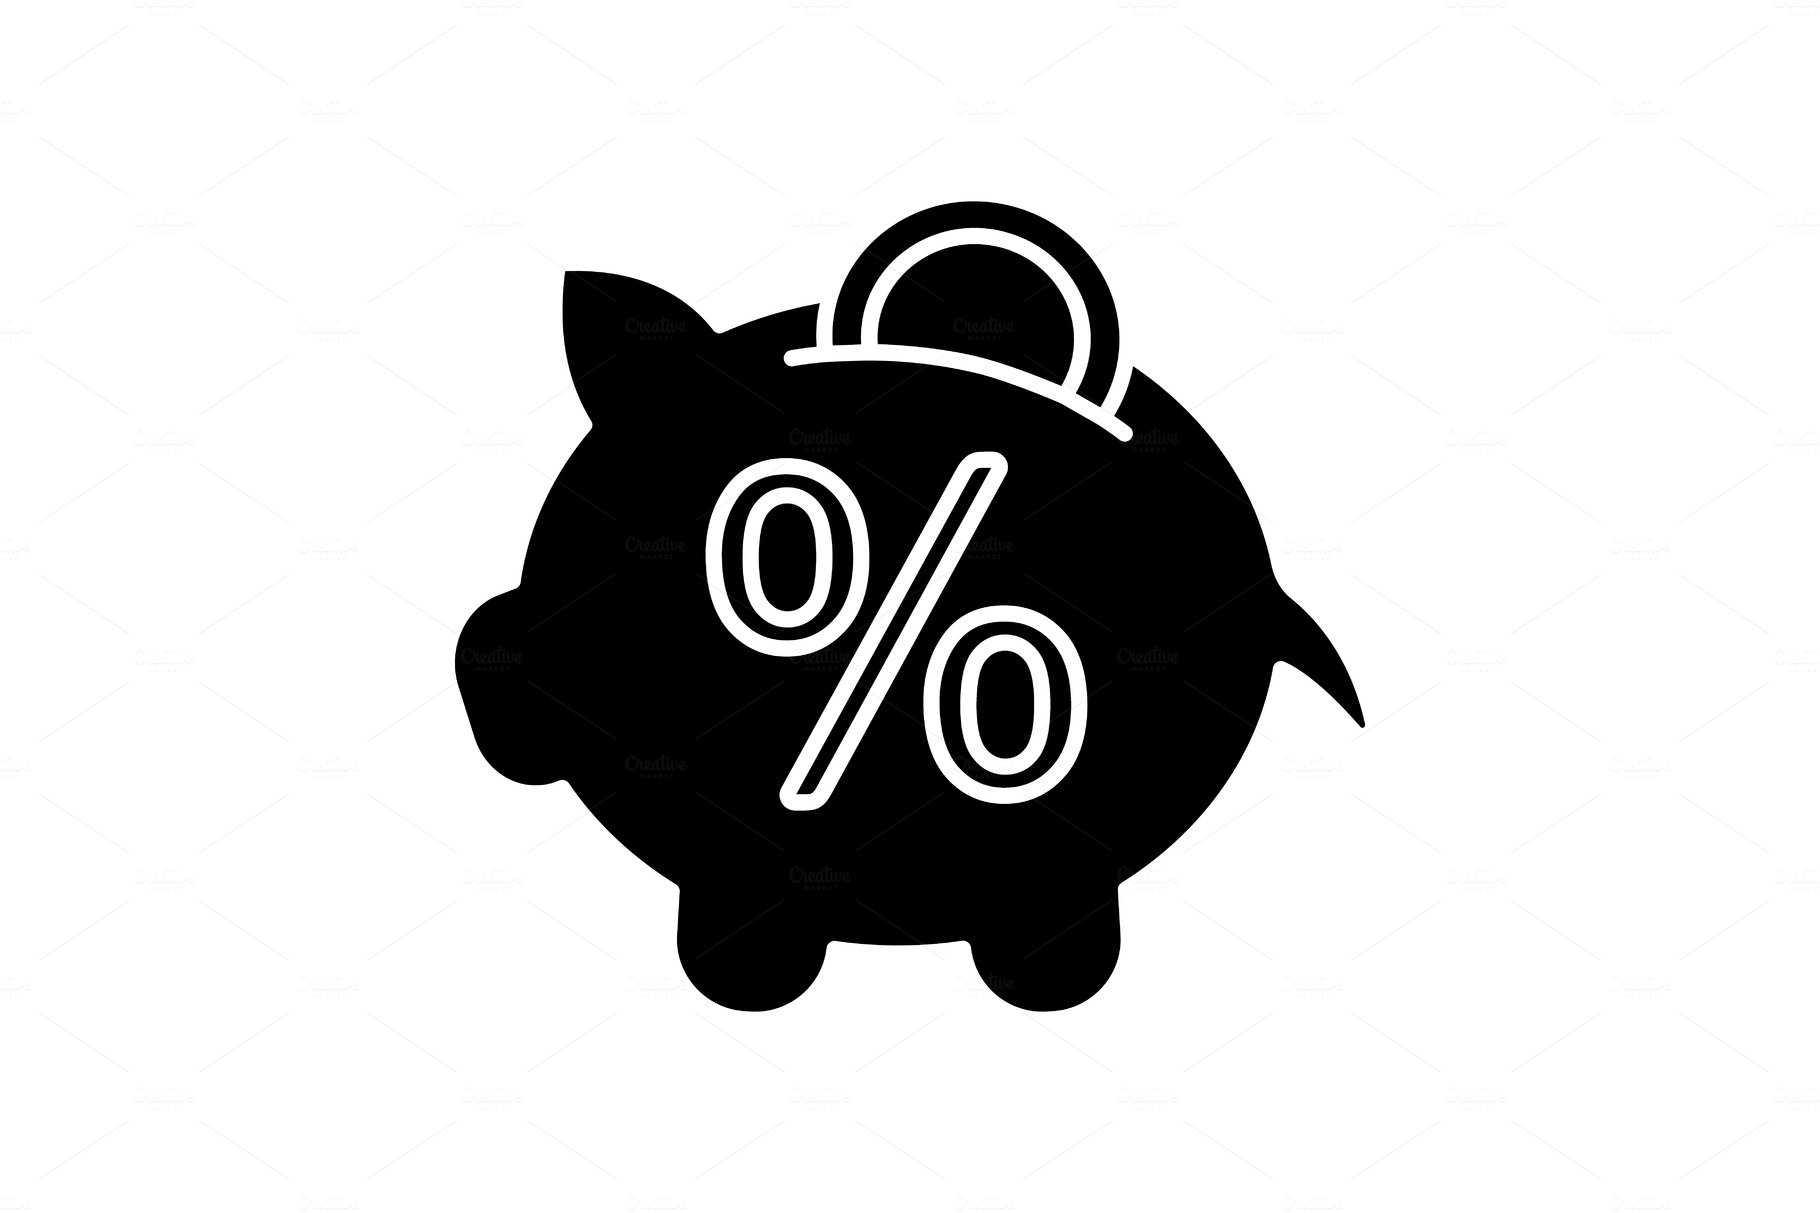 Penny piggy bank with percent icon cover image.